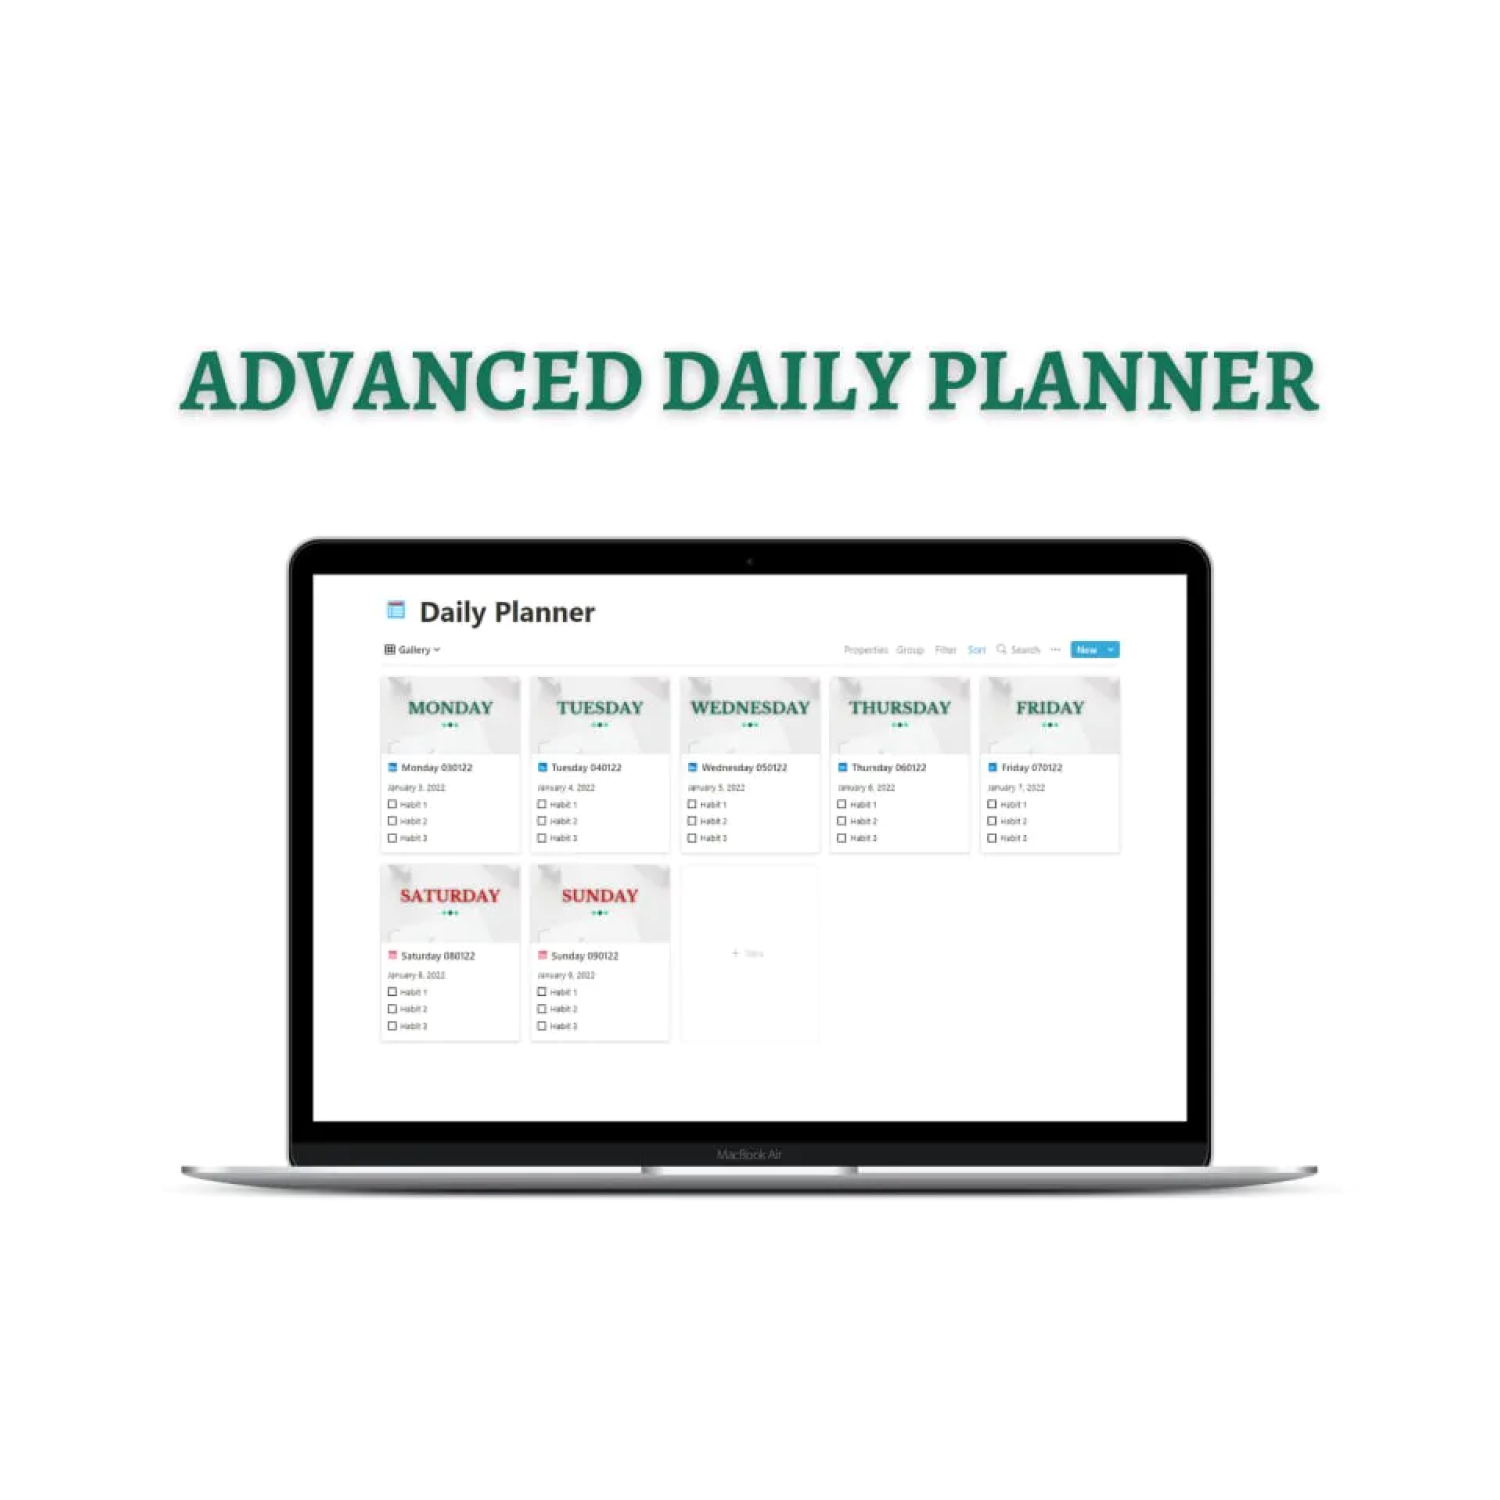 Advanced daily planner.